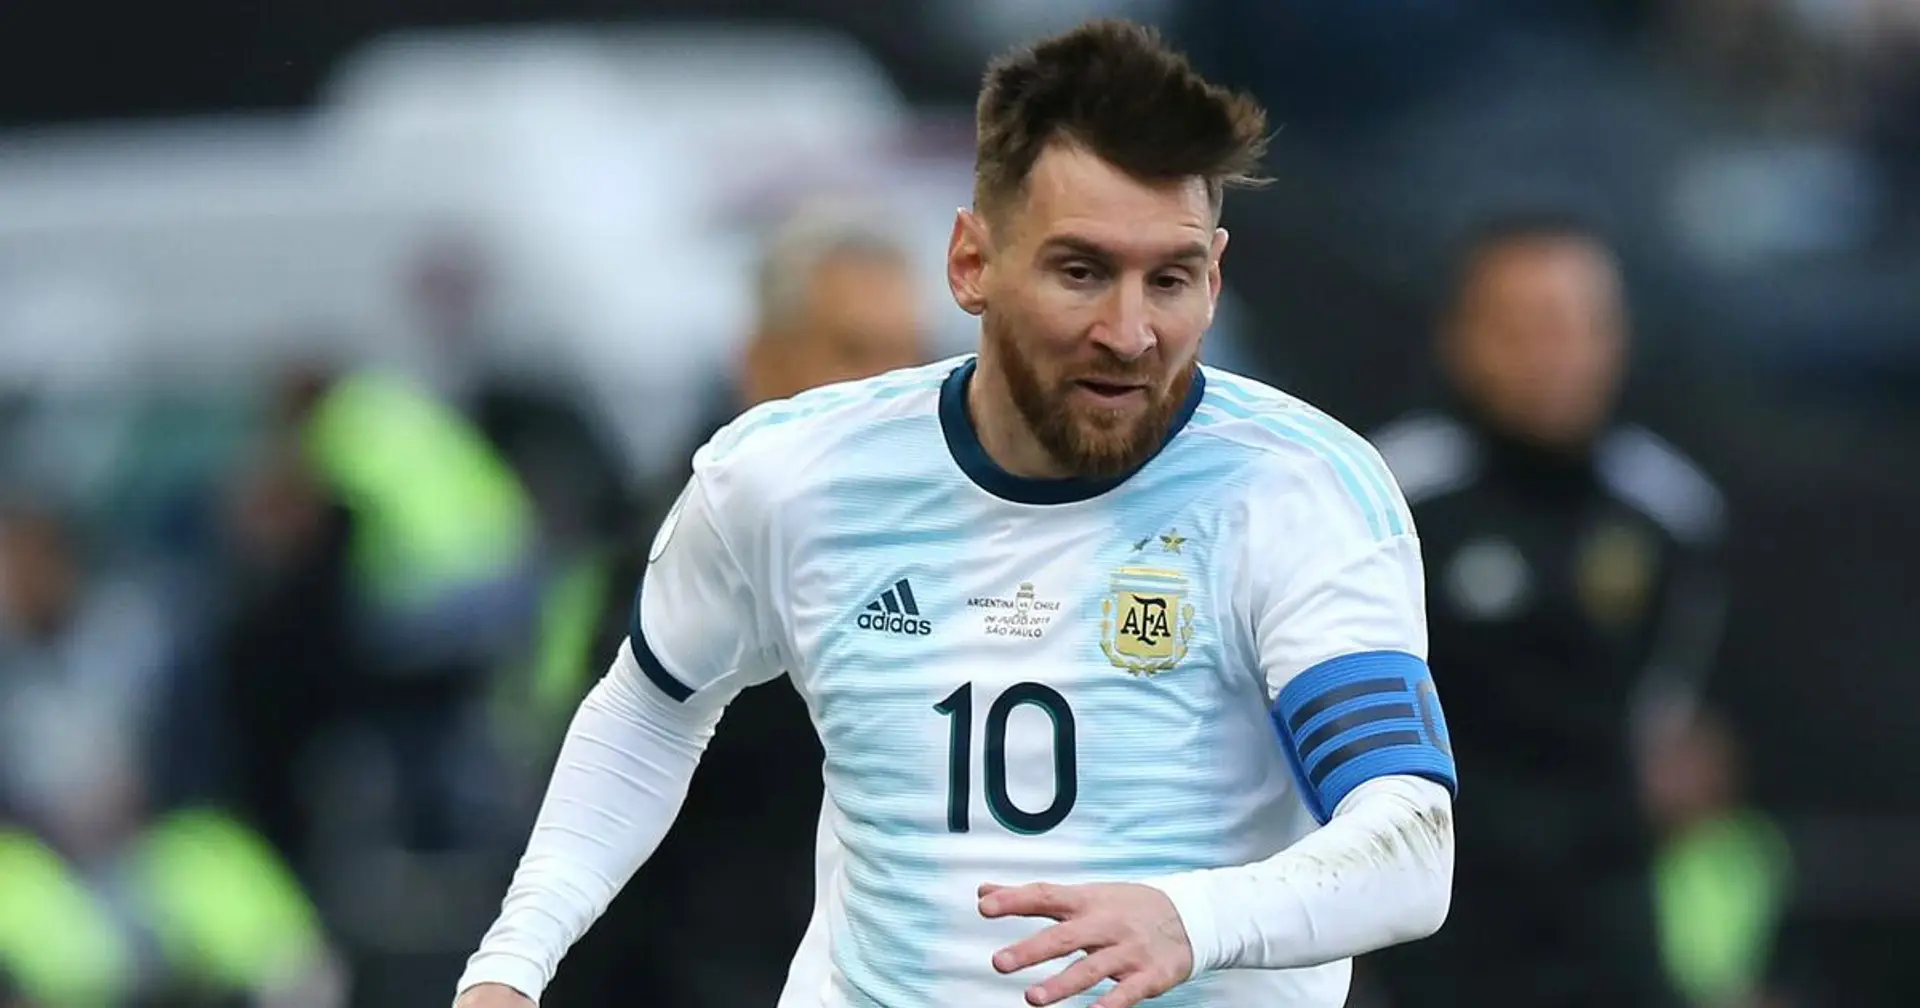 'Little by little, we are becoming stronger as a group': Leo Messi happy with Argentina evolution